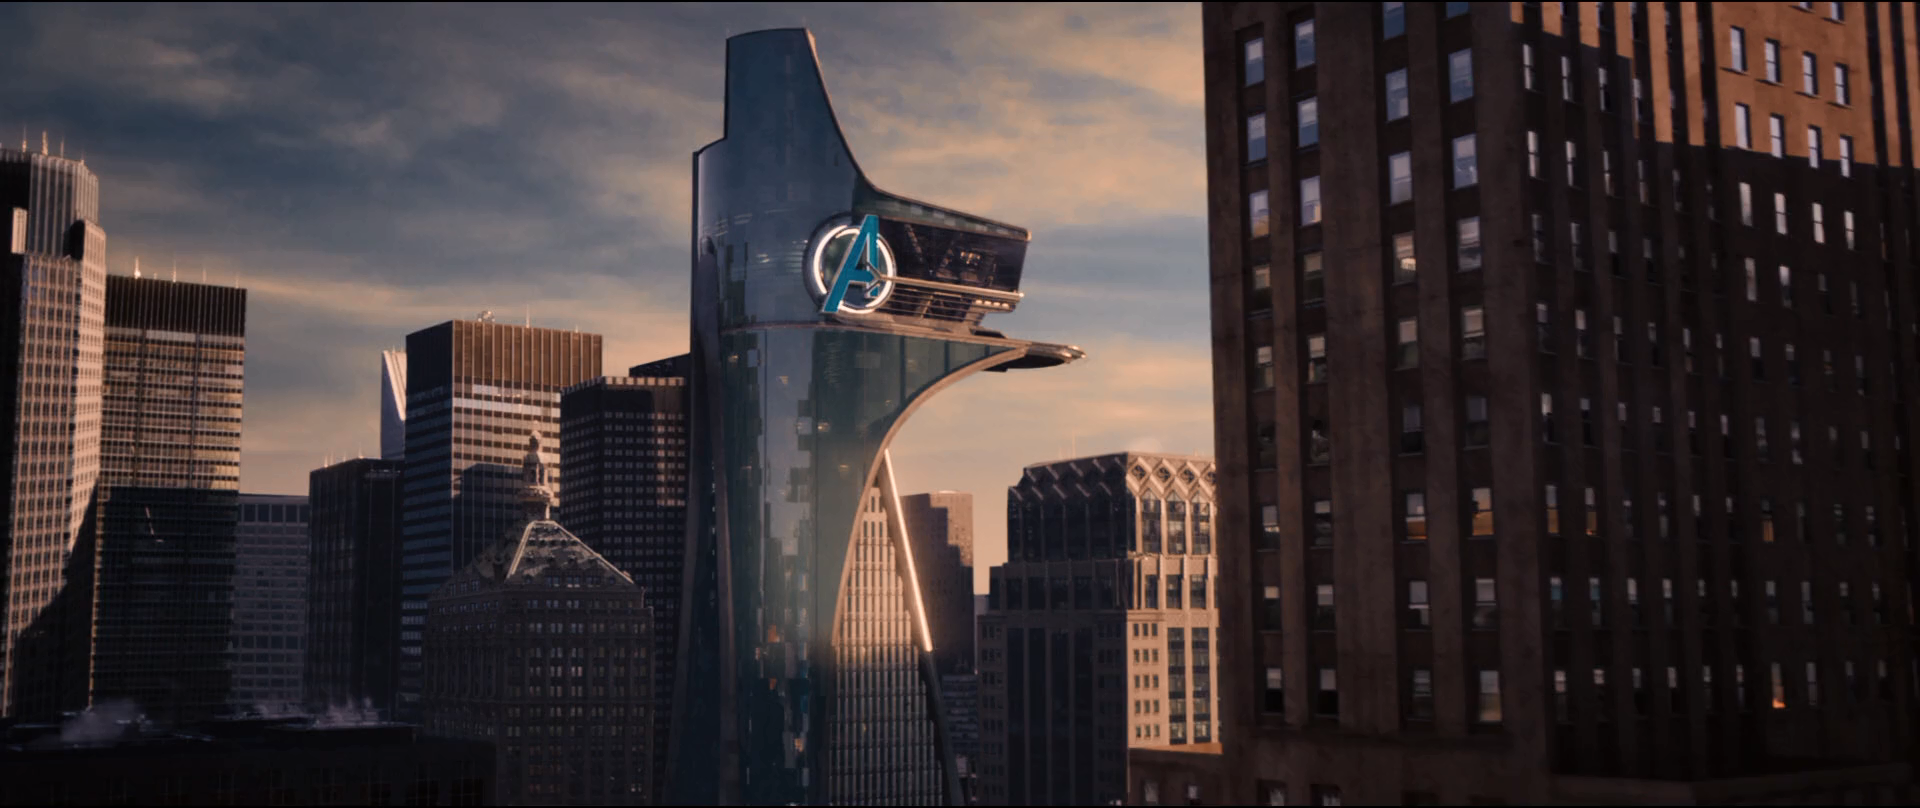 Avengers Tower in "Avengers: Age of Ultron"